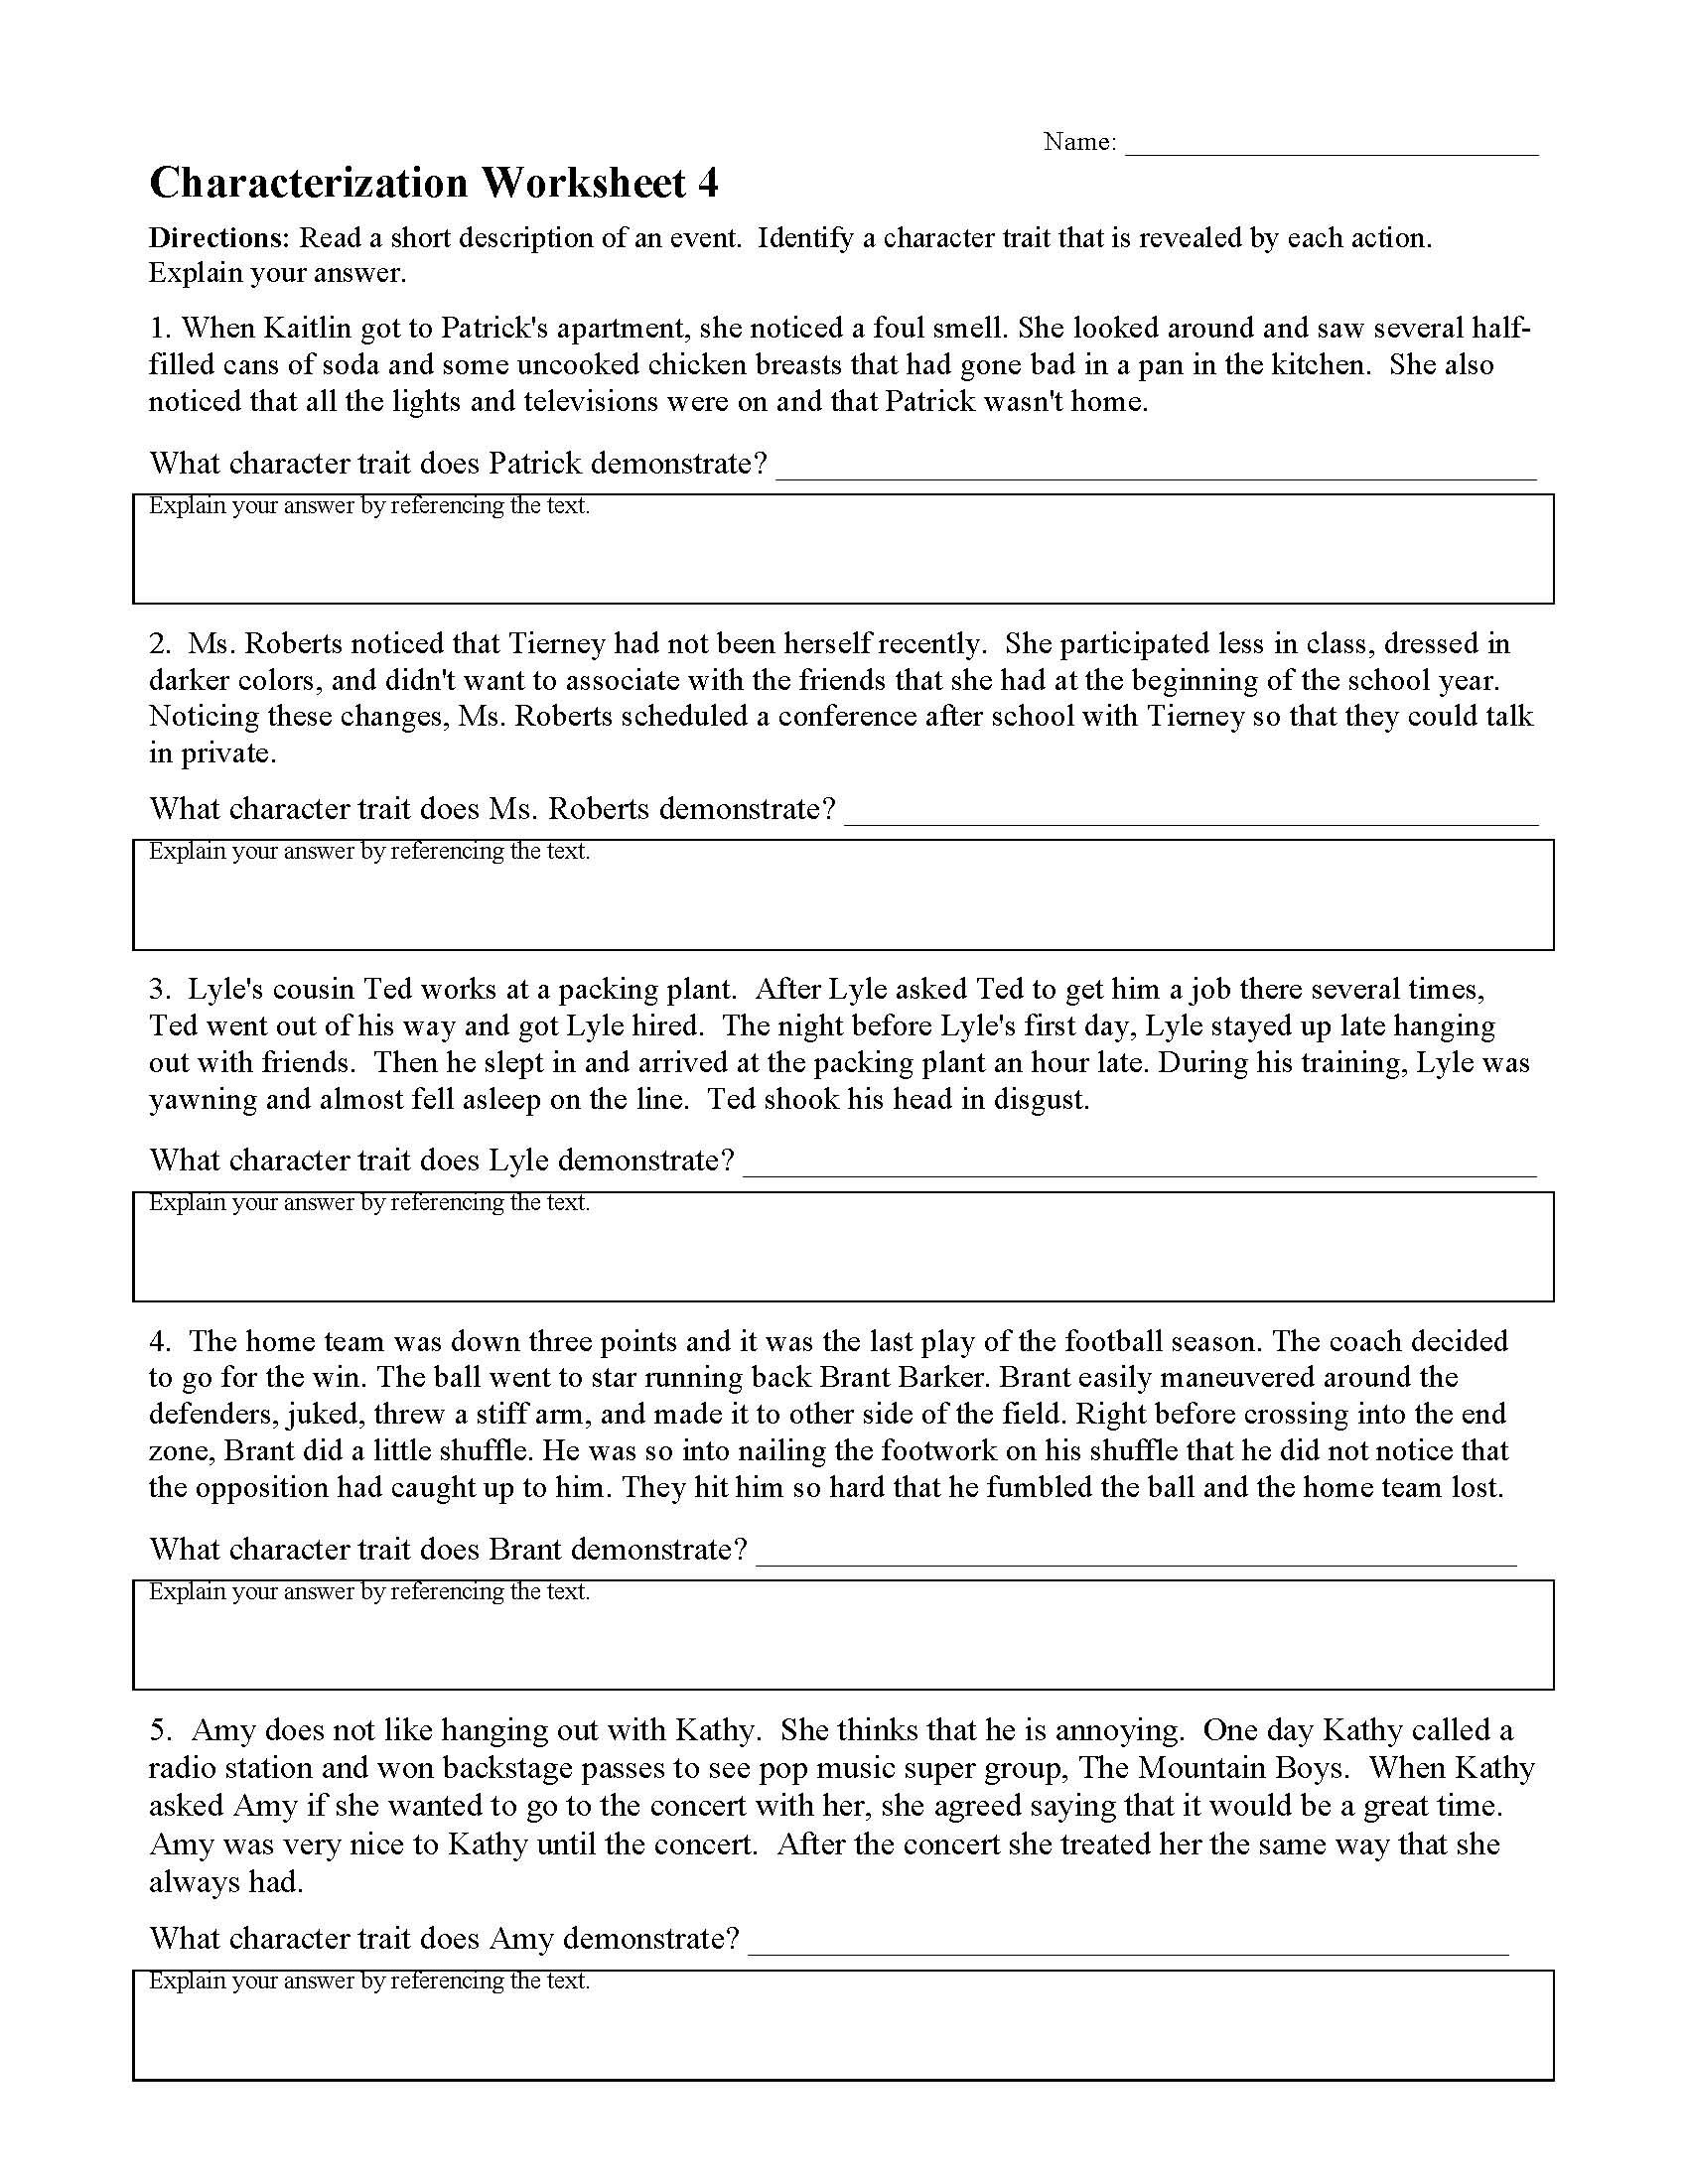 characterization-worksheet-4-preview